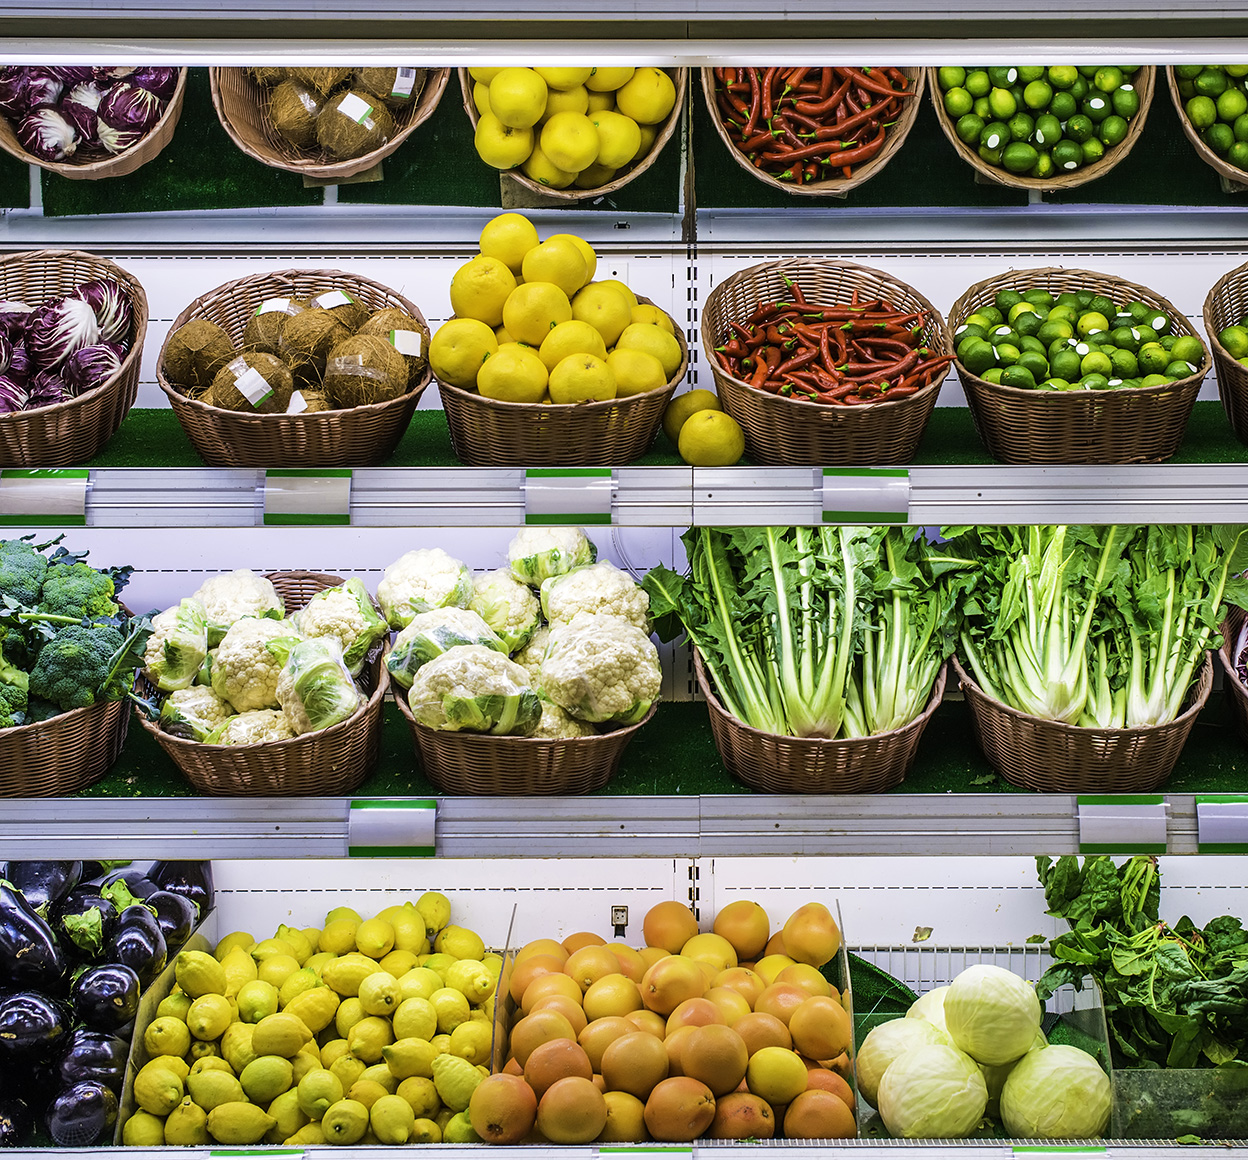 Fruits and vegetables in a supermarket aisle